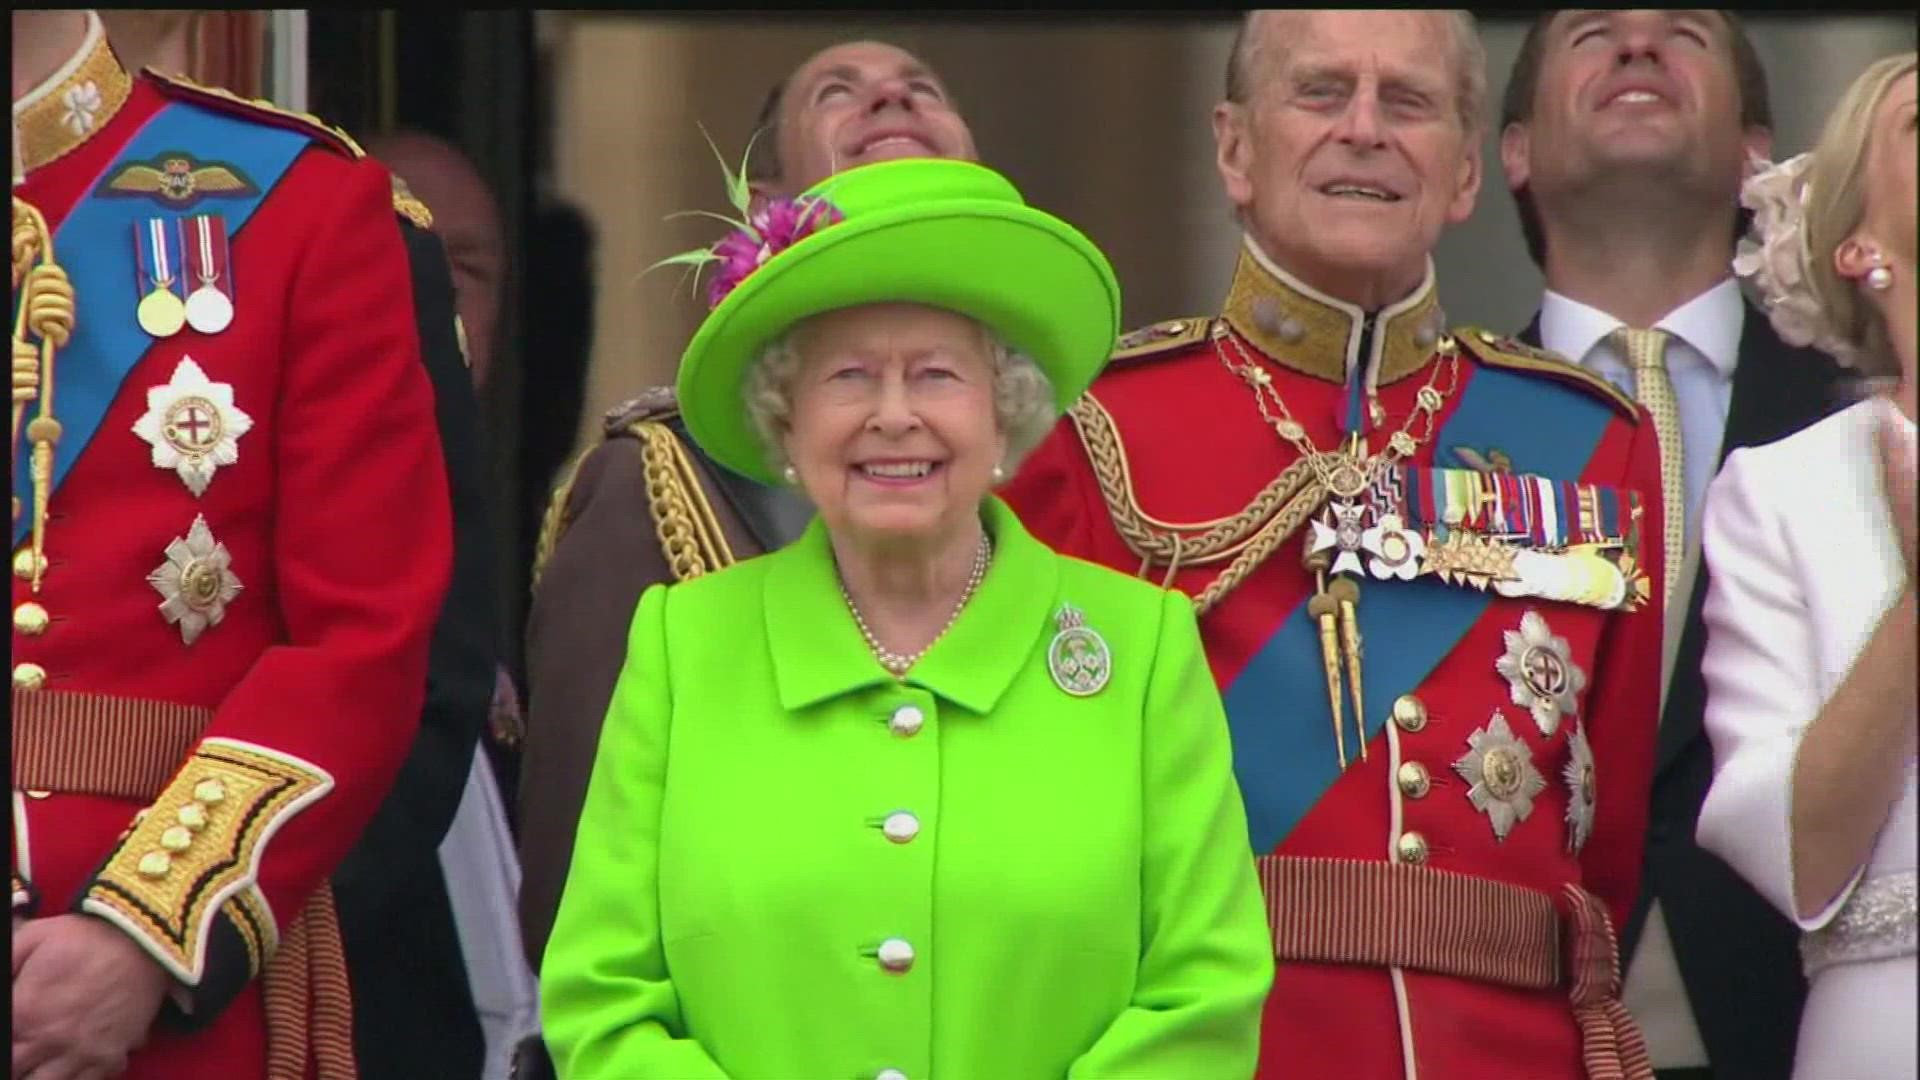 Queen Elizabeth II sat on the throne longer than any monarch in Britain’s history.